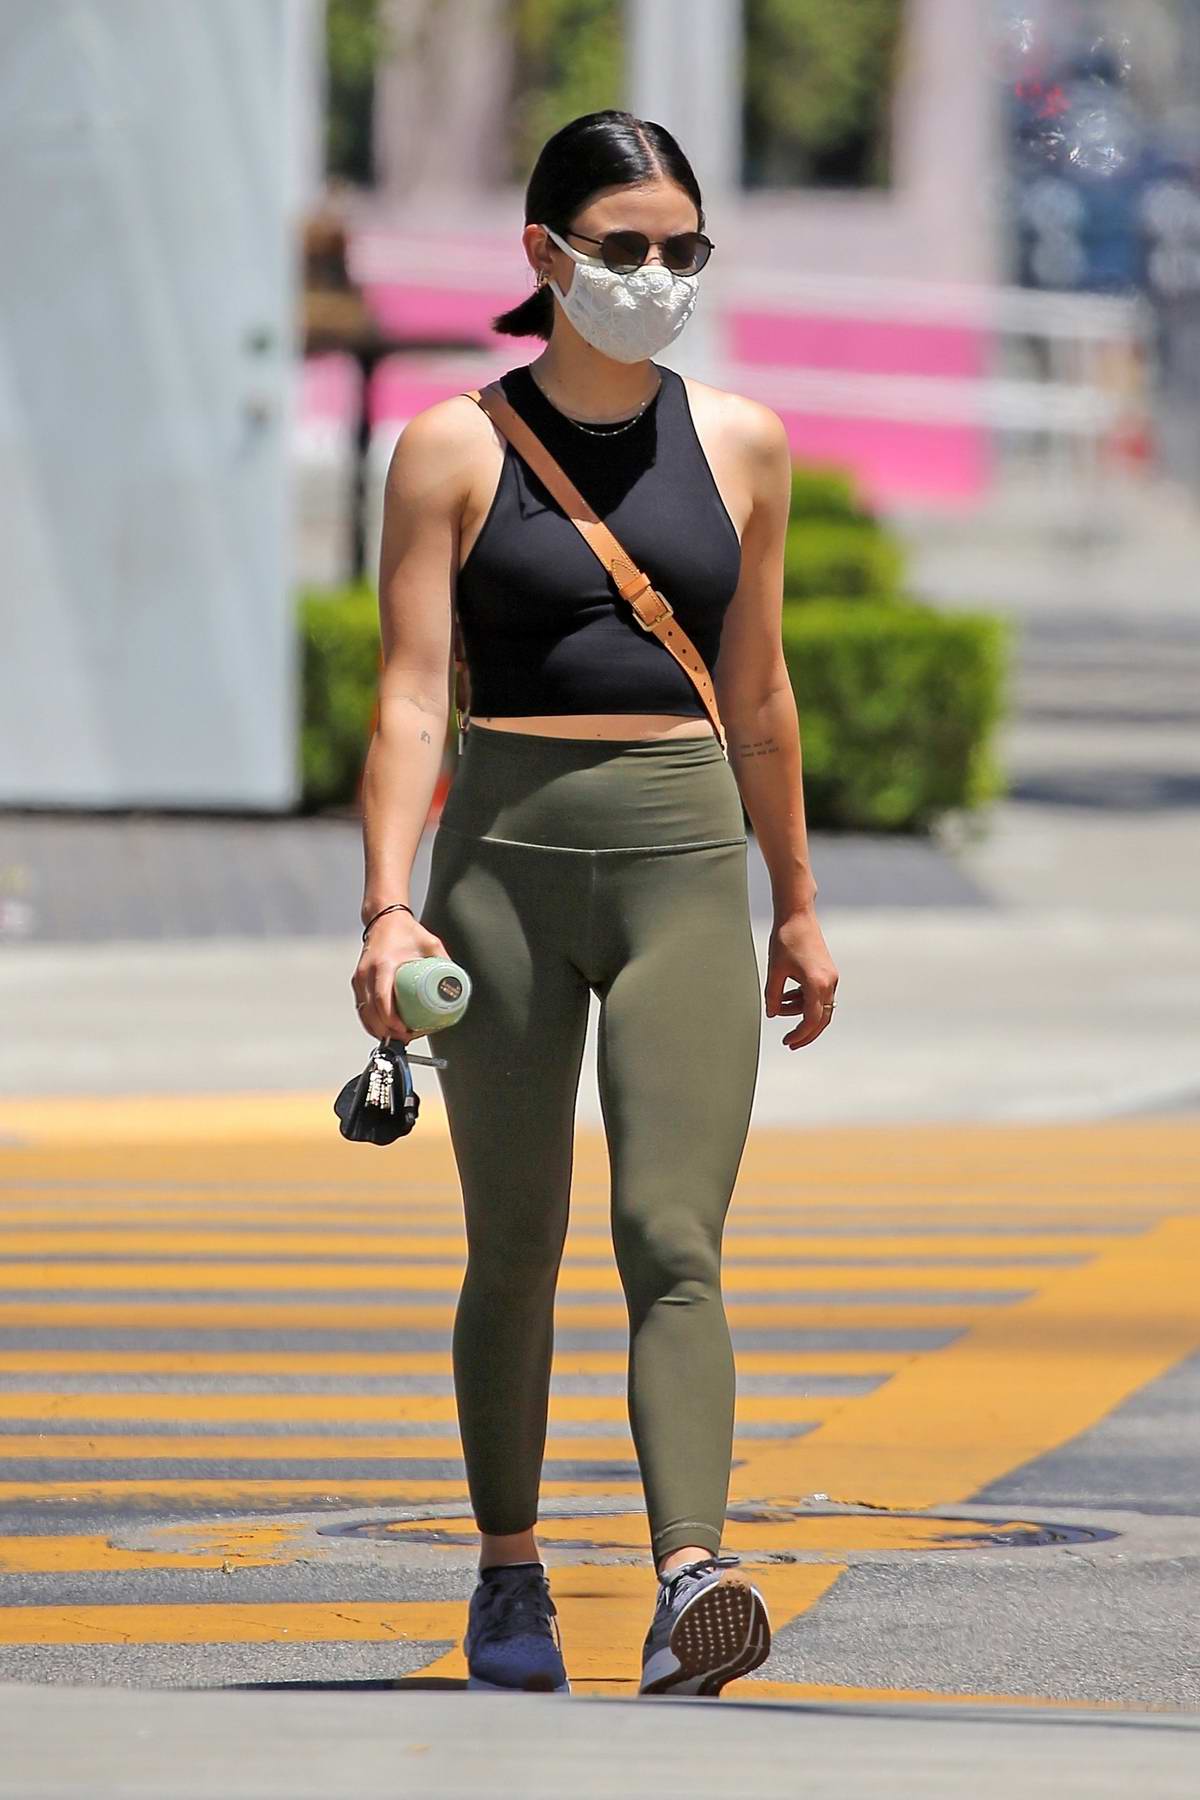 https://www.celebsfirst.com/wp-content/uploads/2020/05/lucy-hale-rocks-a-crop-top-and-olive-green-leggings-during-a-juice-run-at-kreation-in-west-hollywood-california-210520_8.jpg